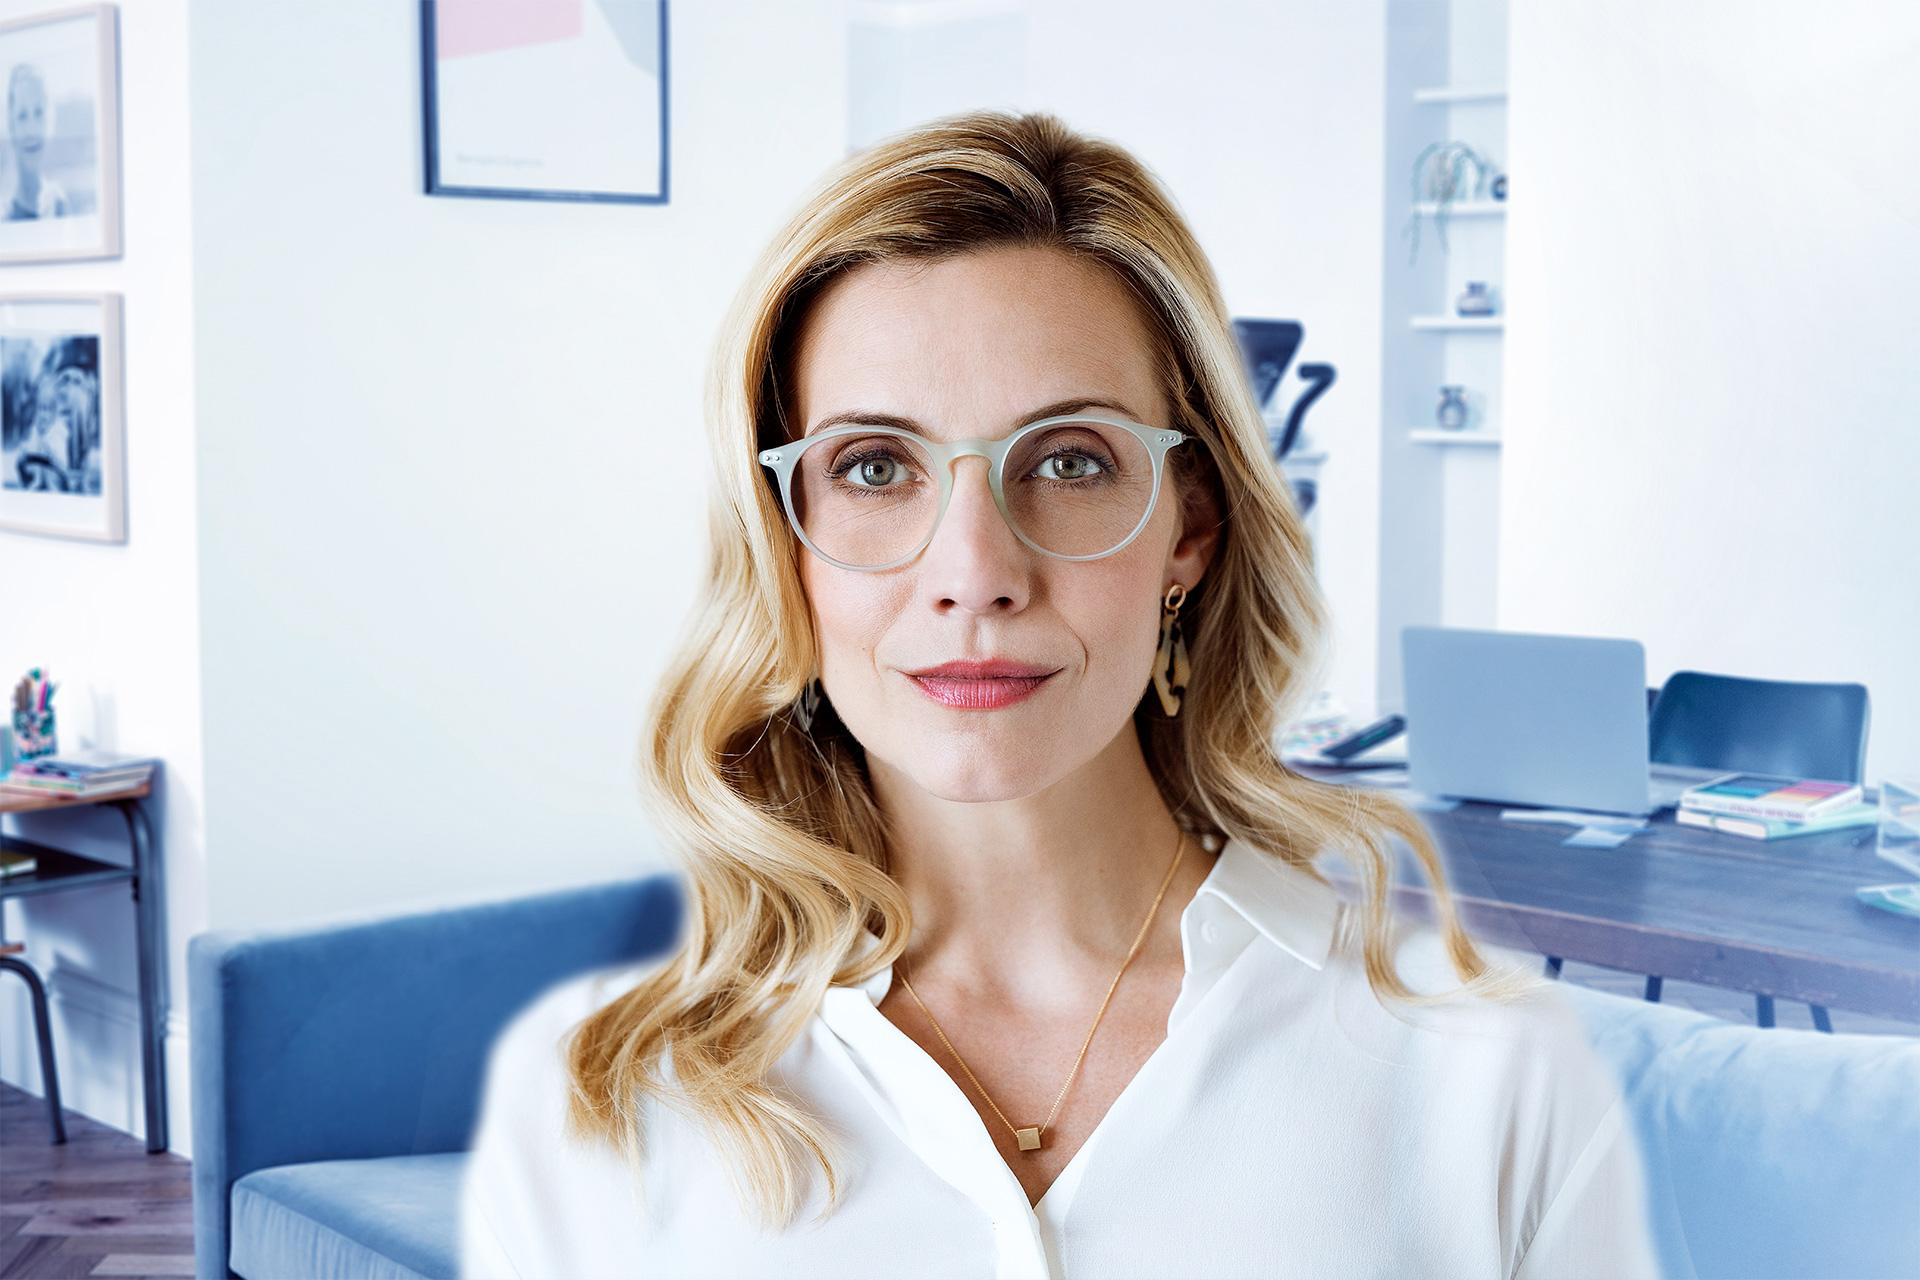 Despite its sophisticated design features, progressive lenses look like any other clear lenses. They can also be customised to fit almost any shape and size of frame.